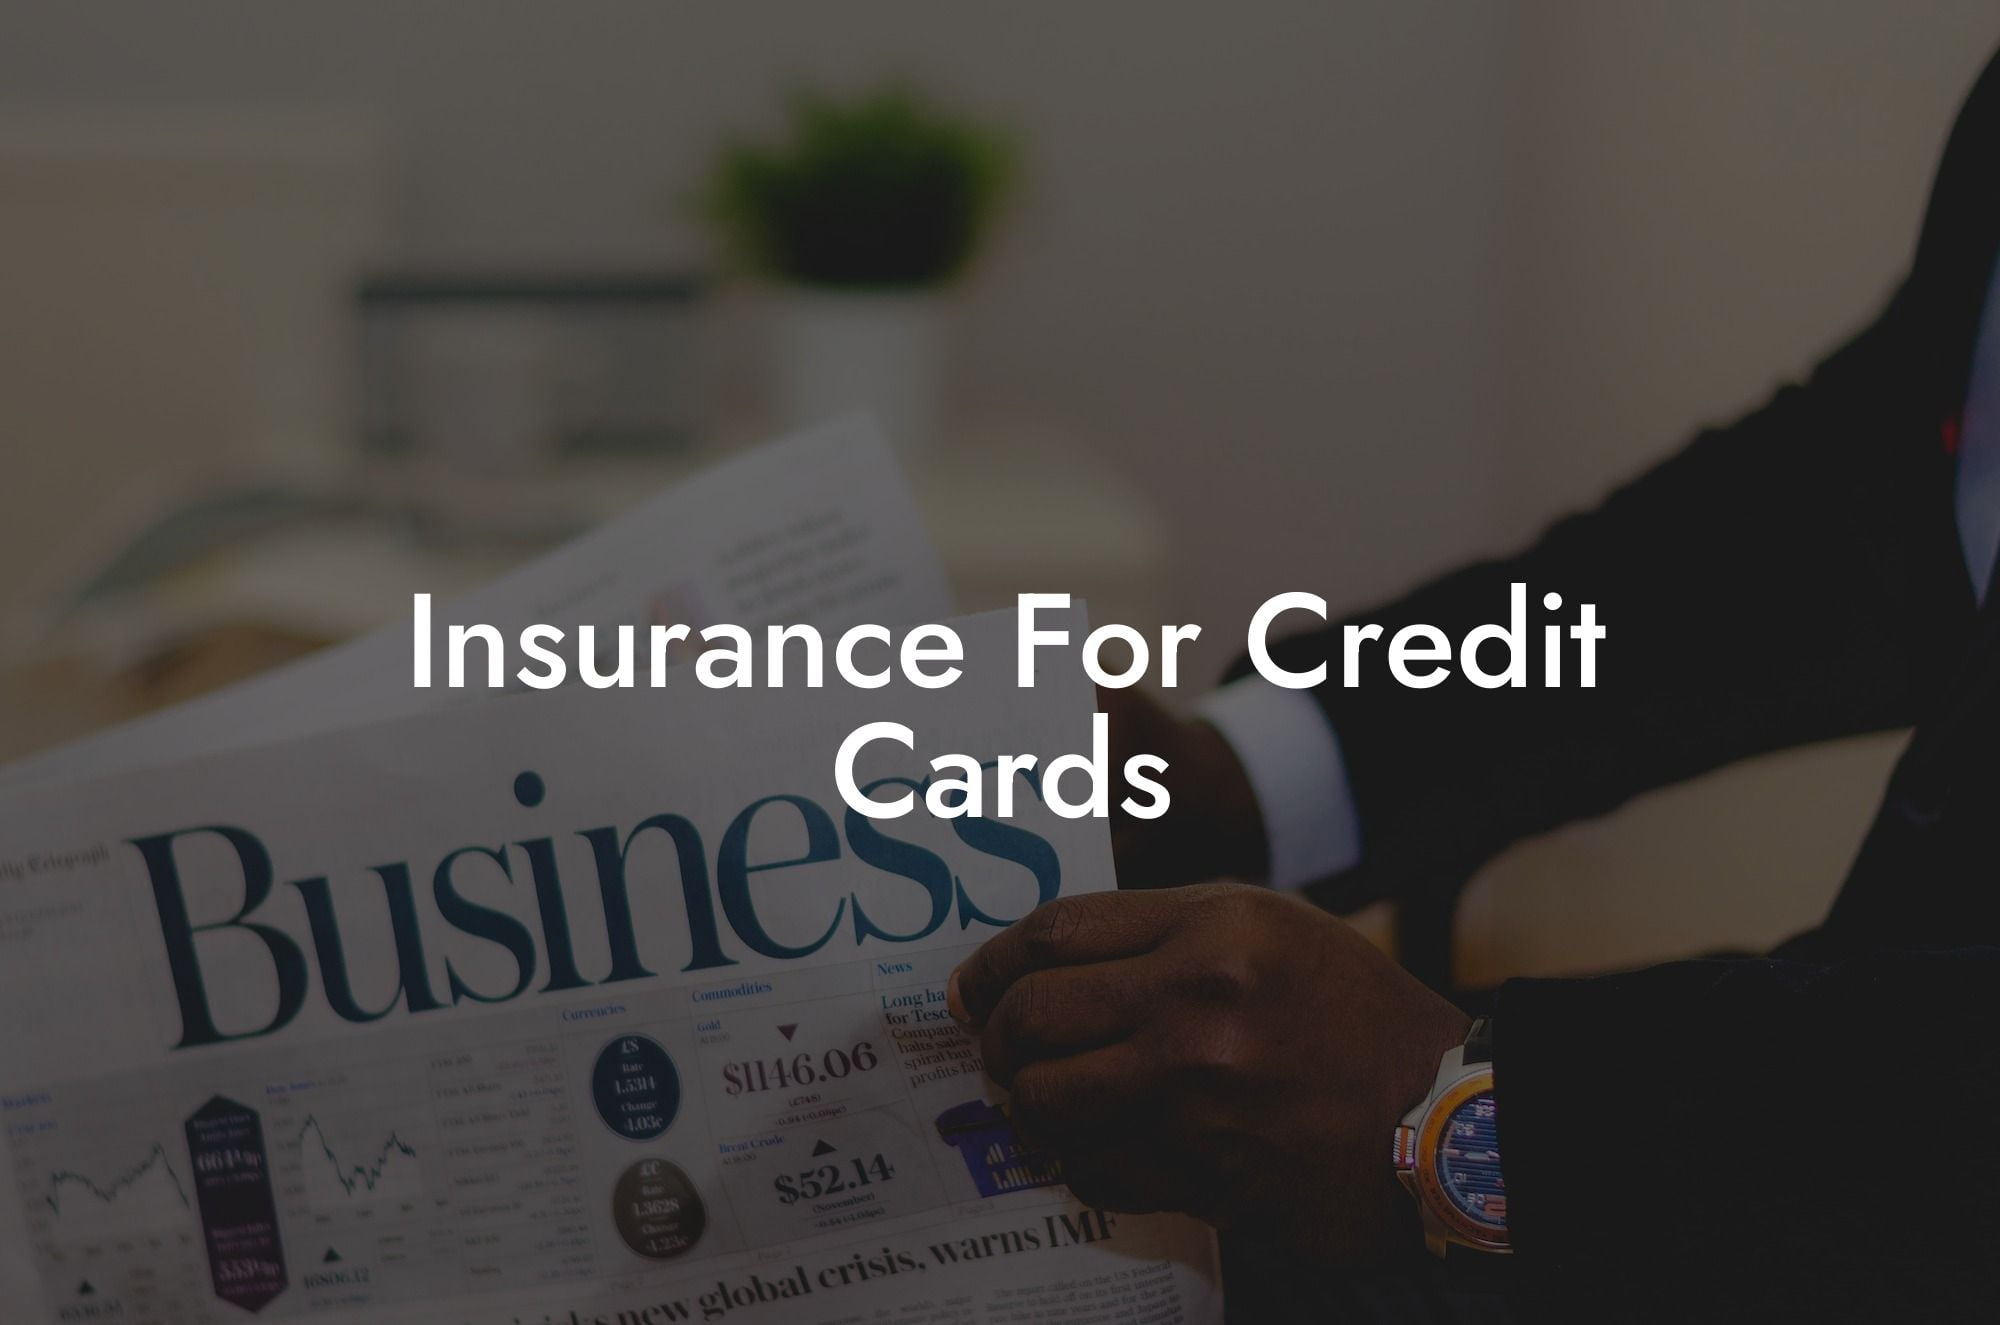 Insurance For Credit Cards